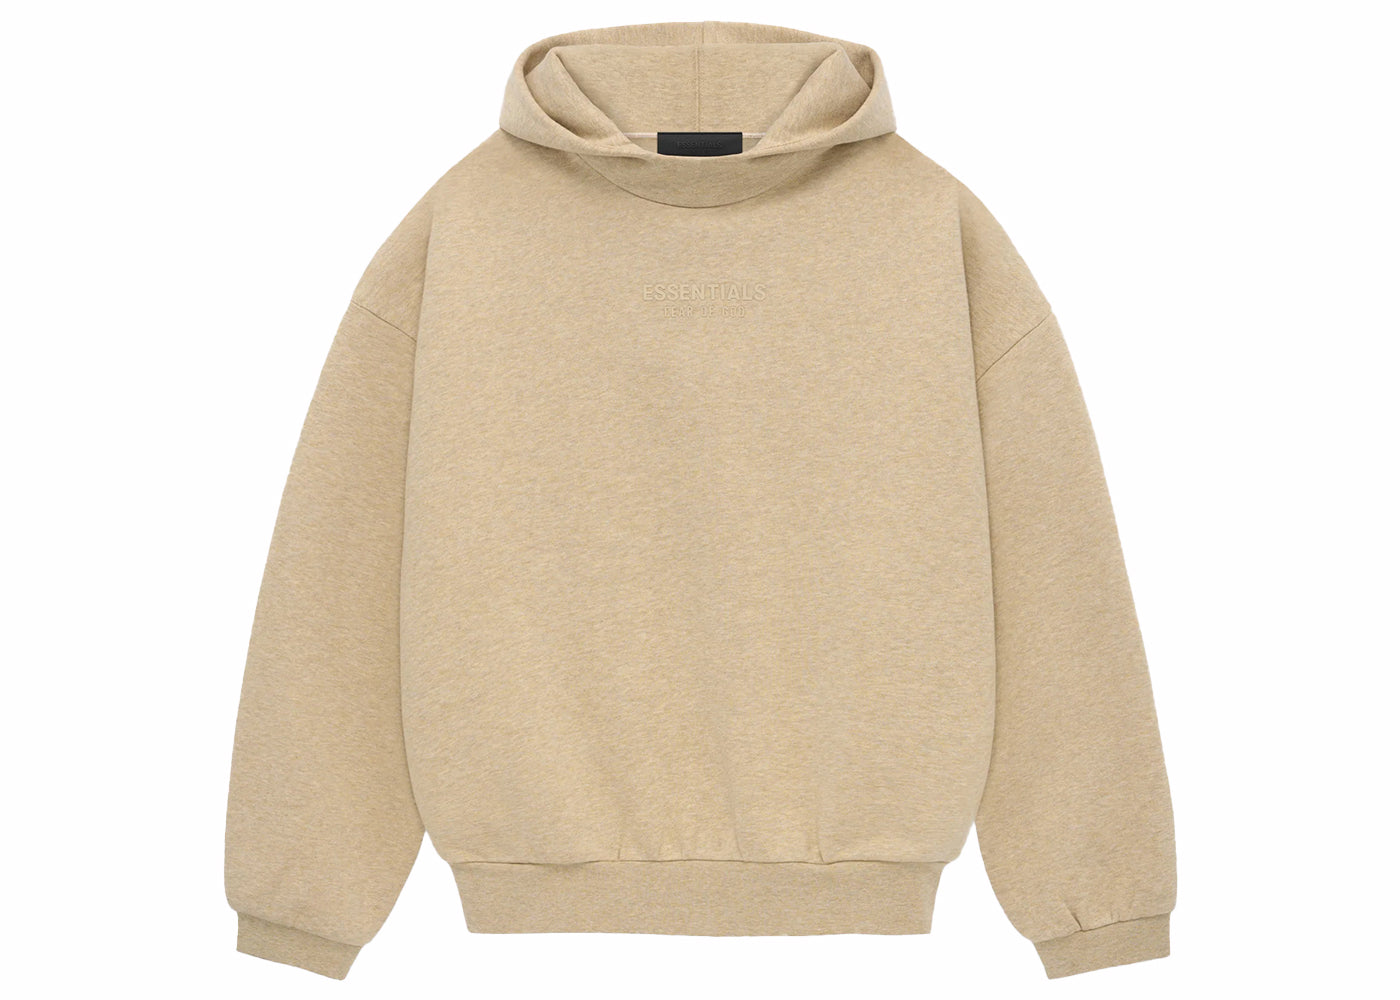 Fear Of God Essentials Hoodie Gold Heather - Size: Large